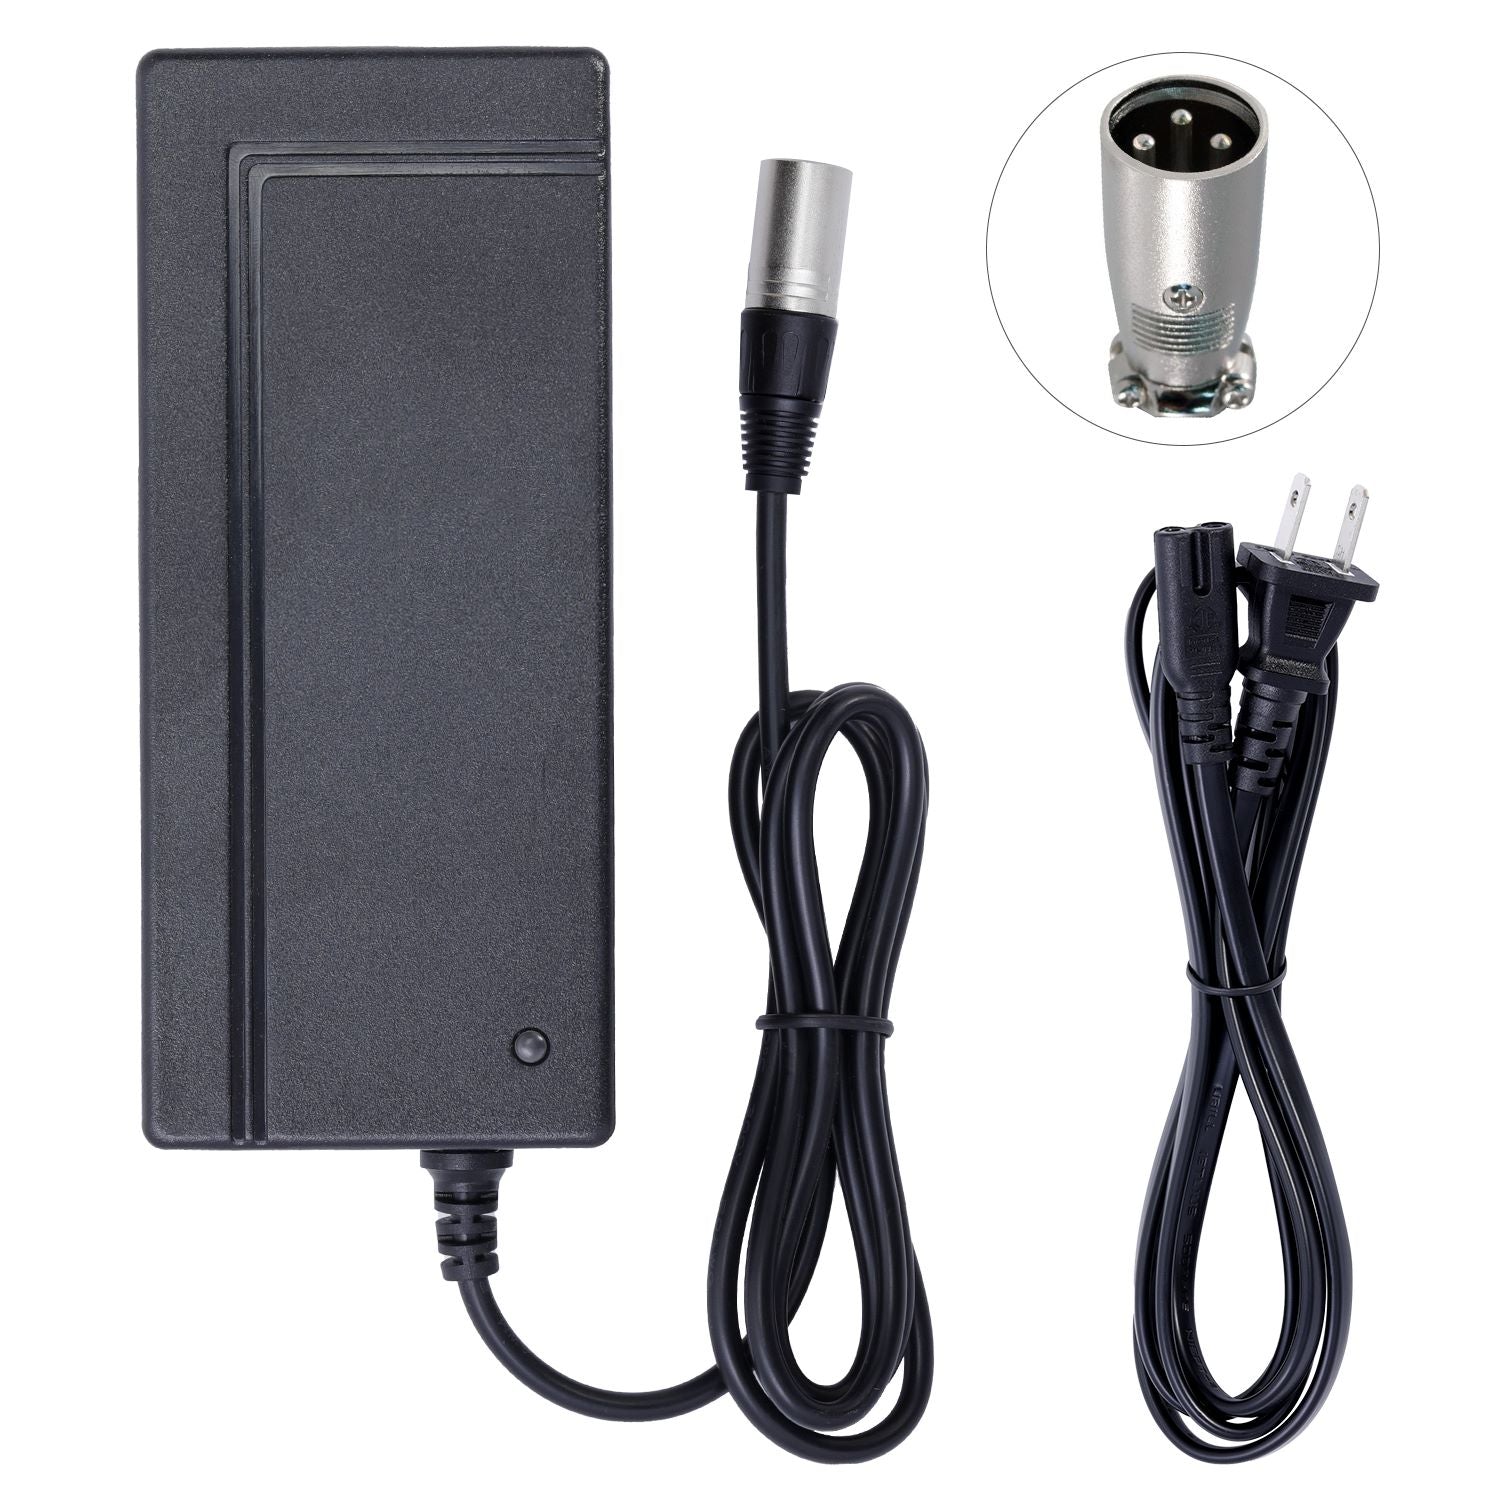 24V 2A UL Certified Charger for FreeRider Mini Ranger Plus Mobility Scooter